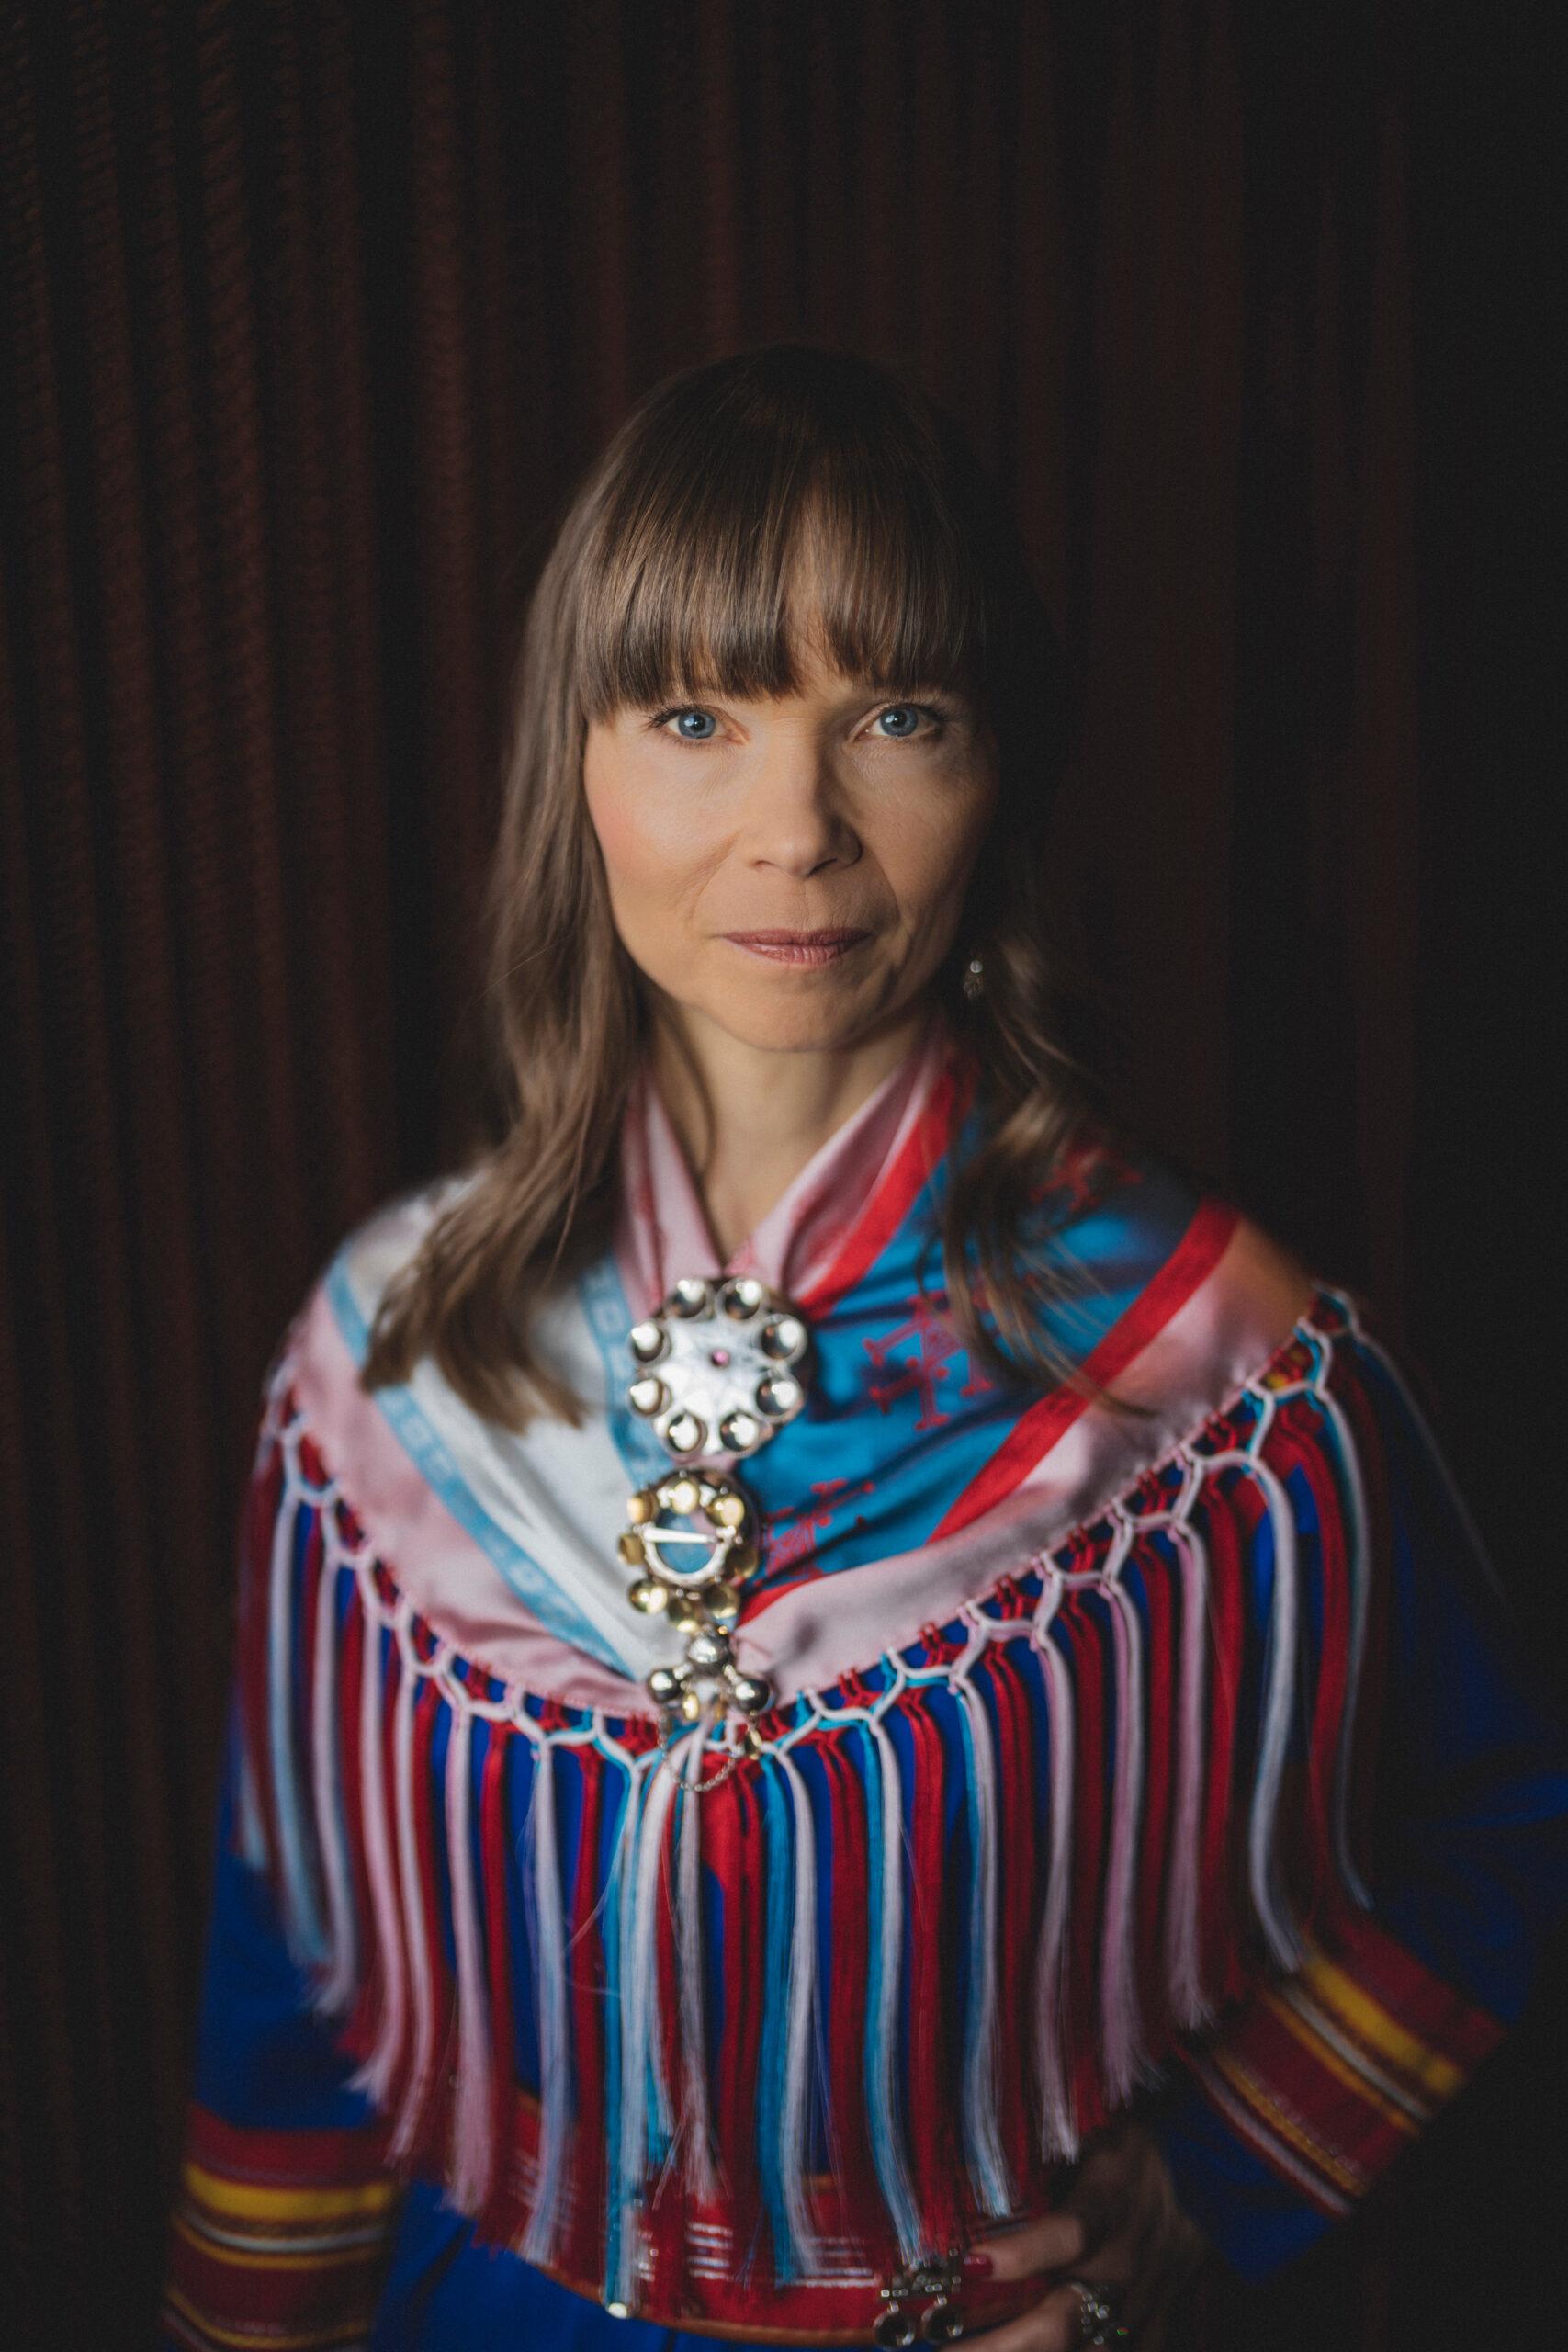 Portrait of a woman in traditional Sami clothing.